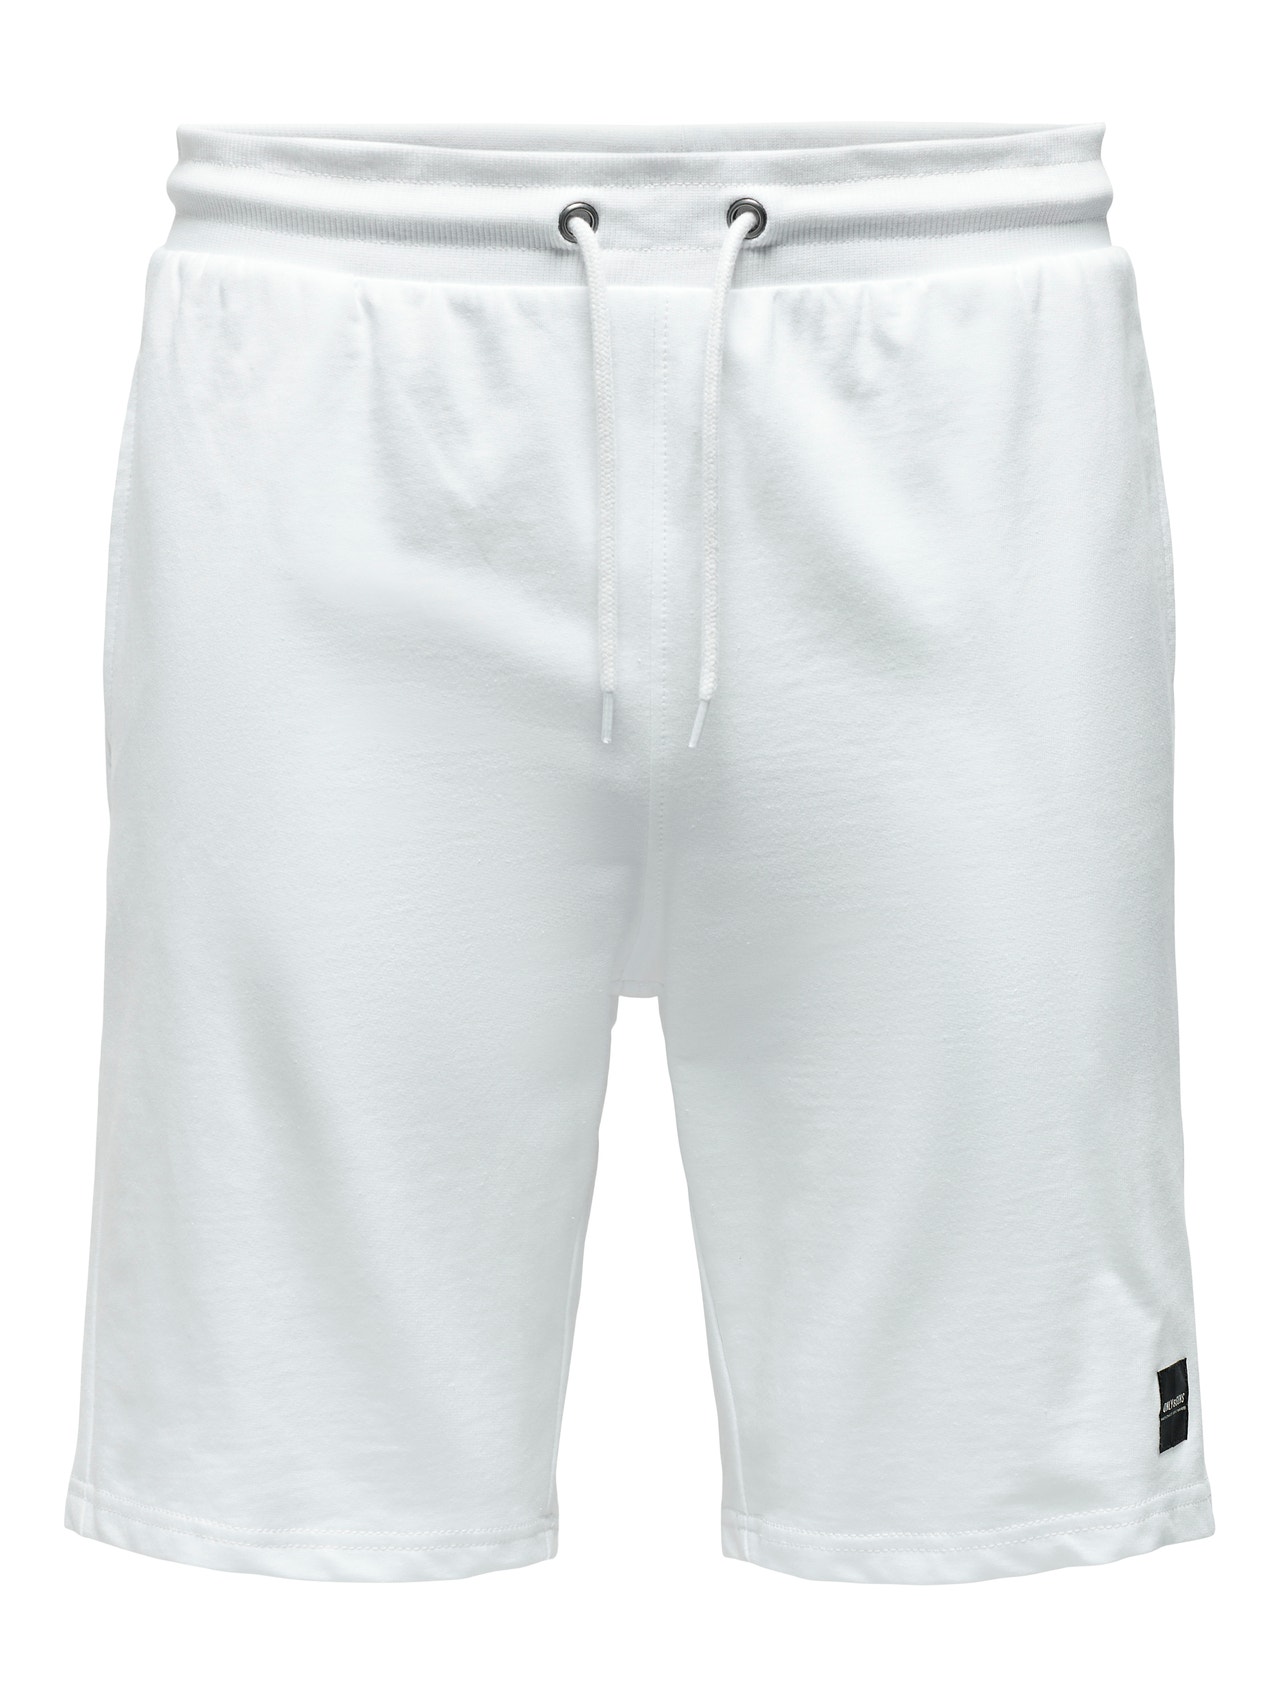 ONLY & SONS Regular Fit Sweat Shorts -Bright White - 22015623